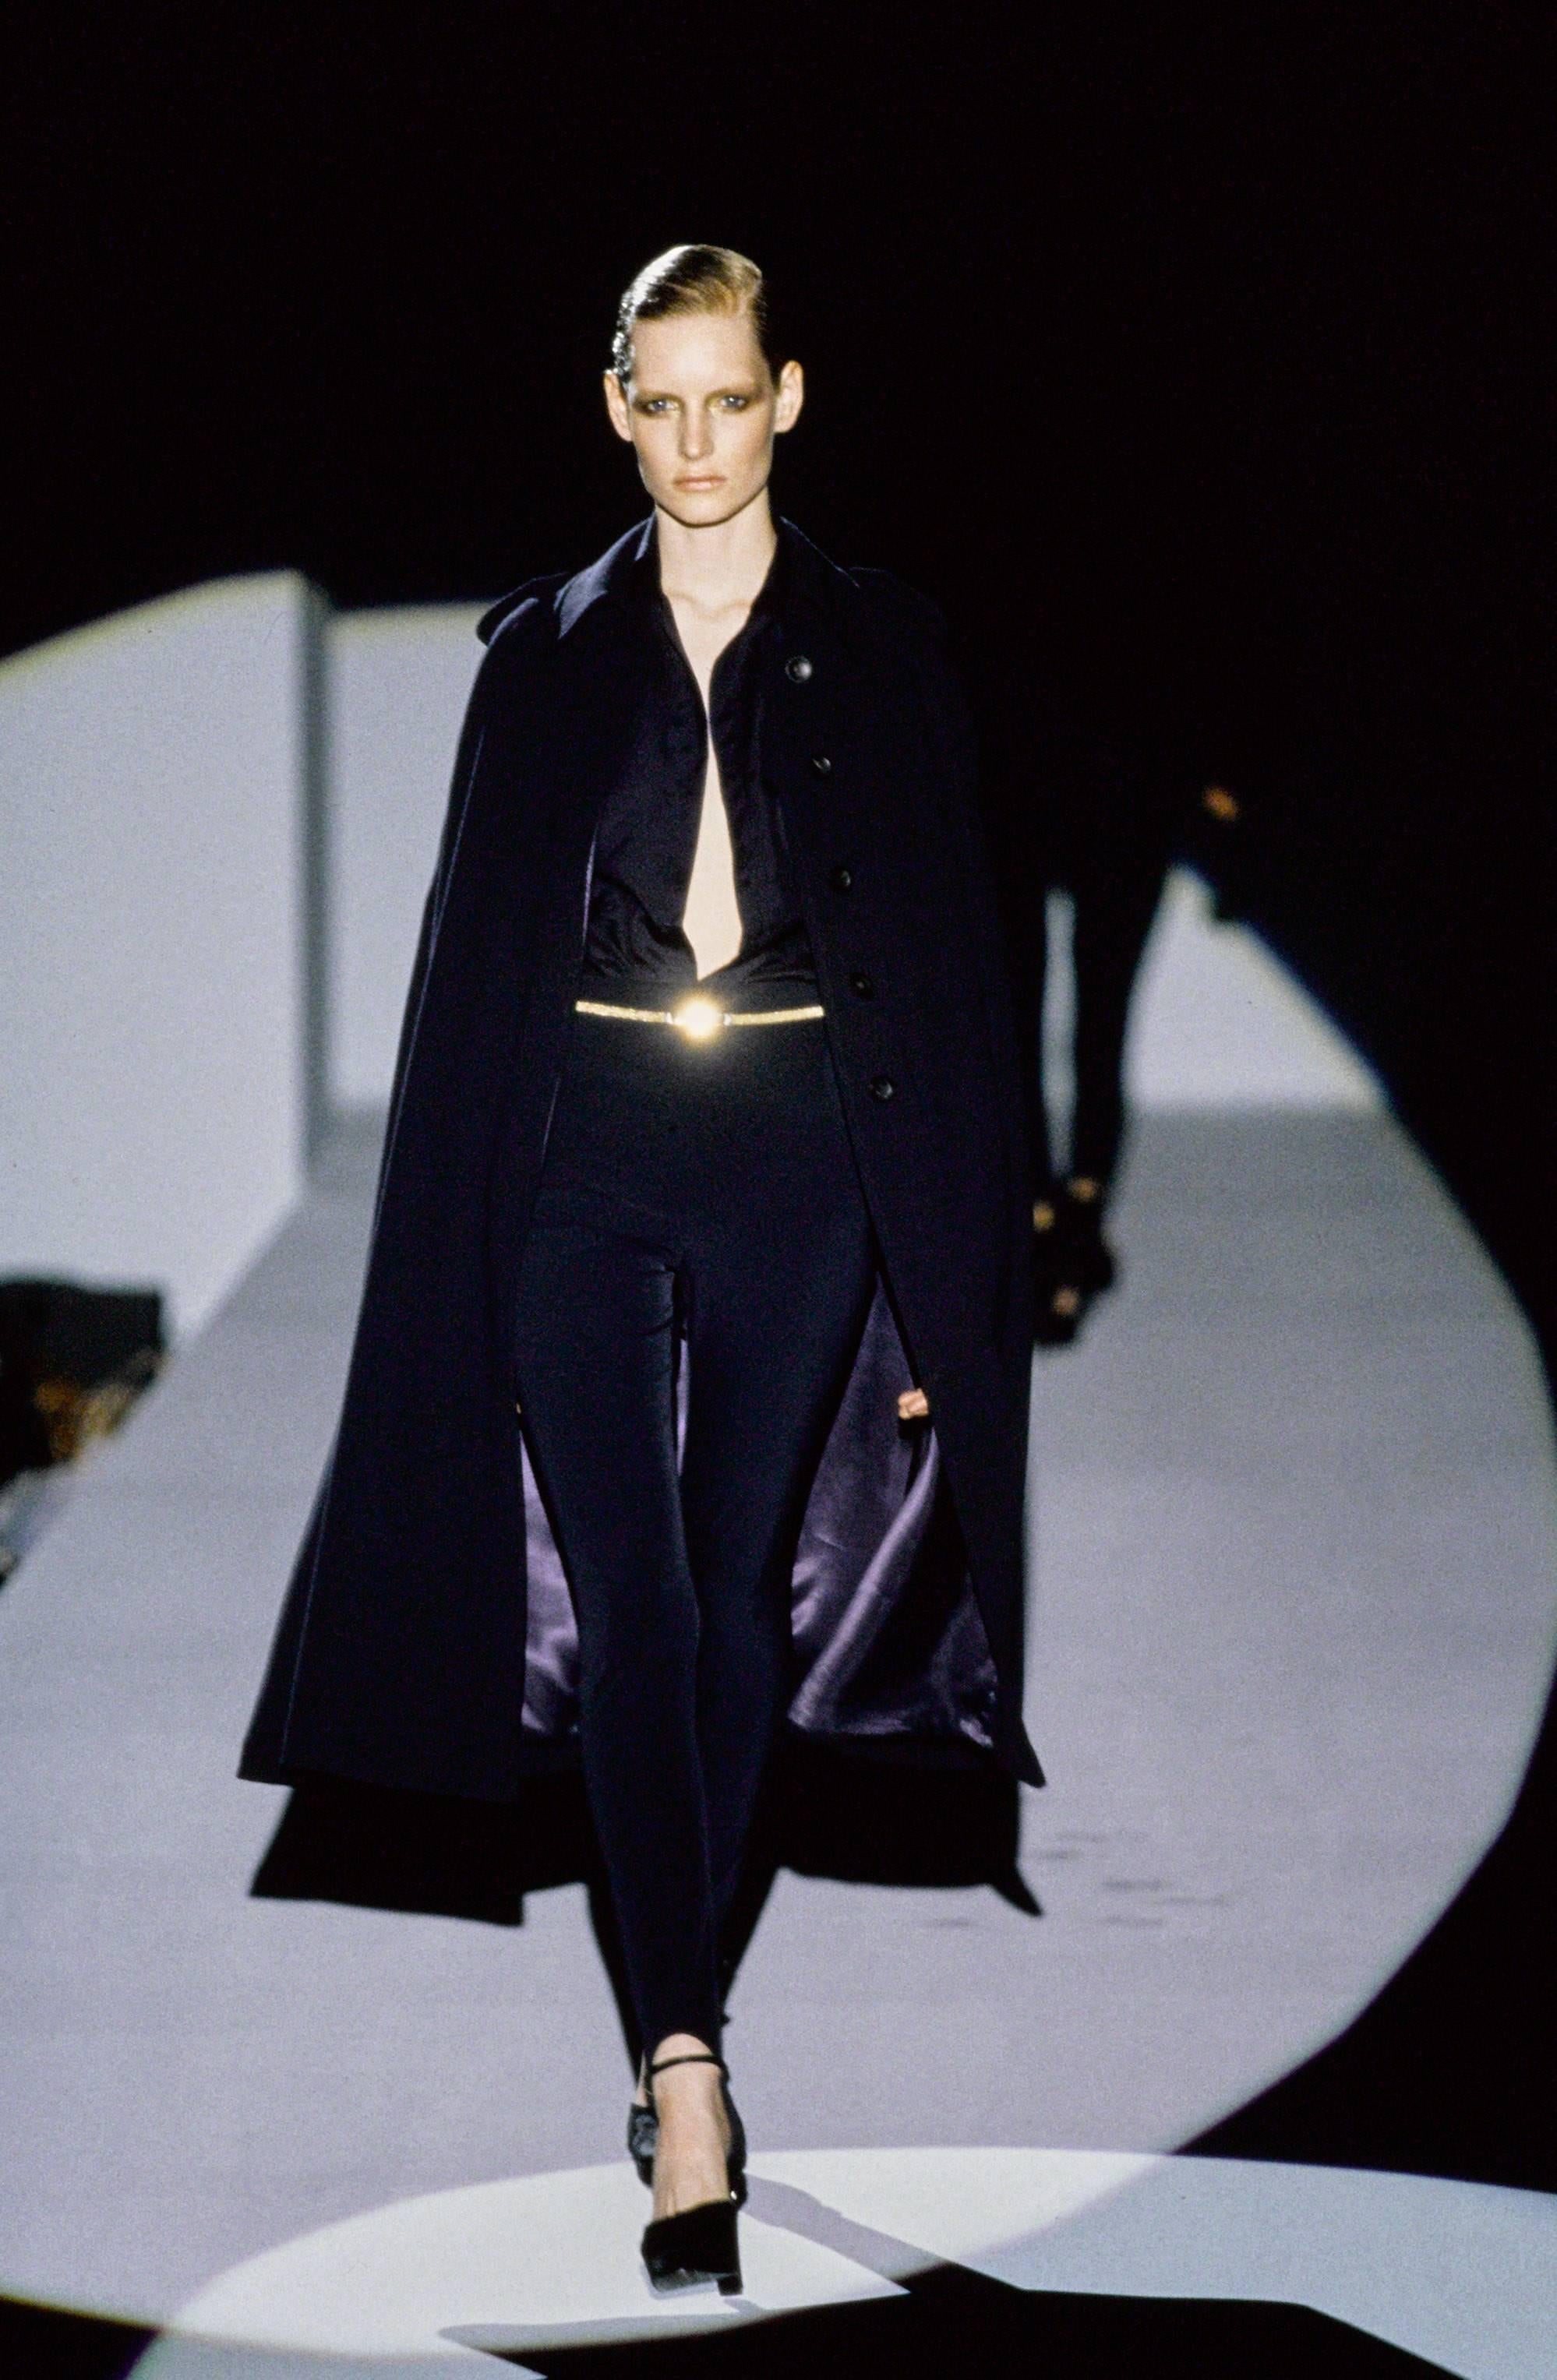 - Gucci by Tom Ford navy wool long cape coat  from fall 1996 collection.  Model Kristian Owen was rocking it on the runway!

- Featuring five buttons in front closure, epaulette shoulder design. 

-- This piece is one of a kind and has never been